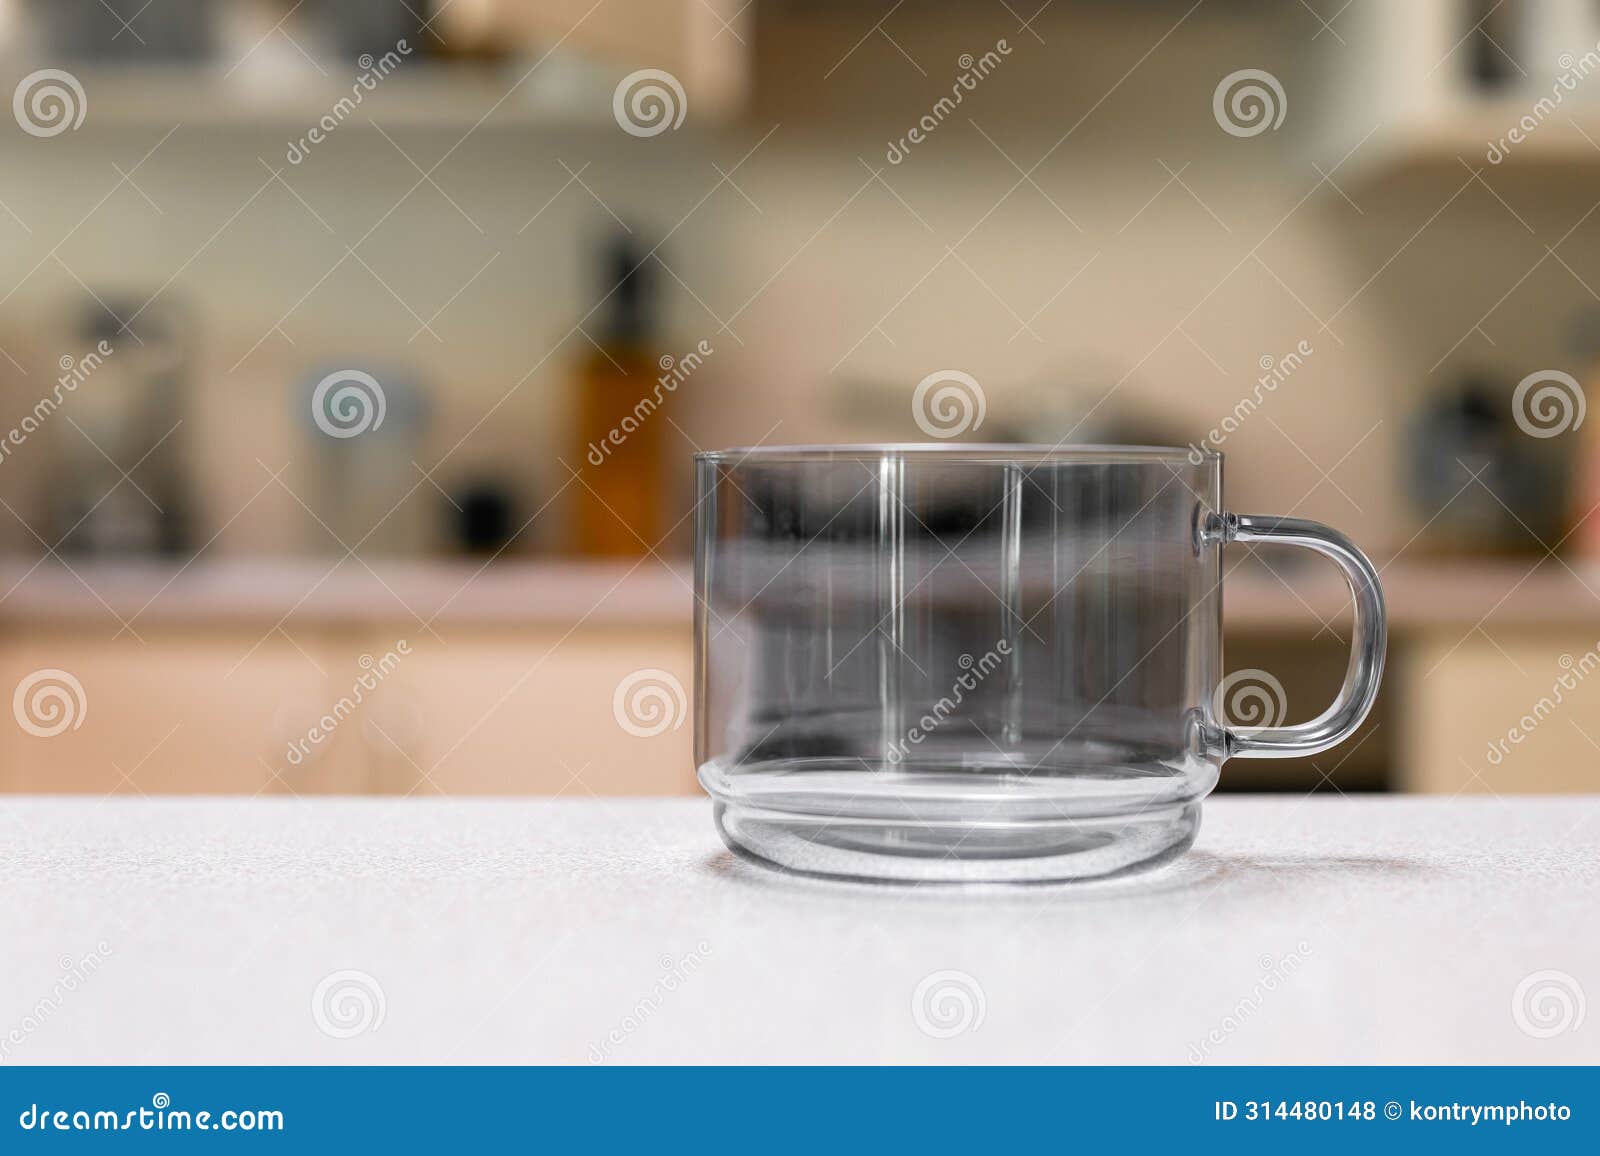 empty glass cup sitting on laminated kitchen benchtop, cupboards and cooking appliances in background